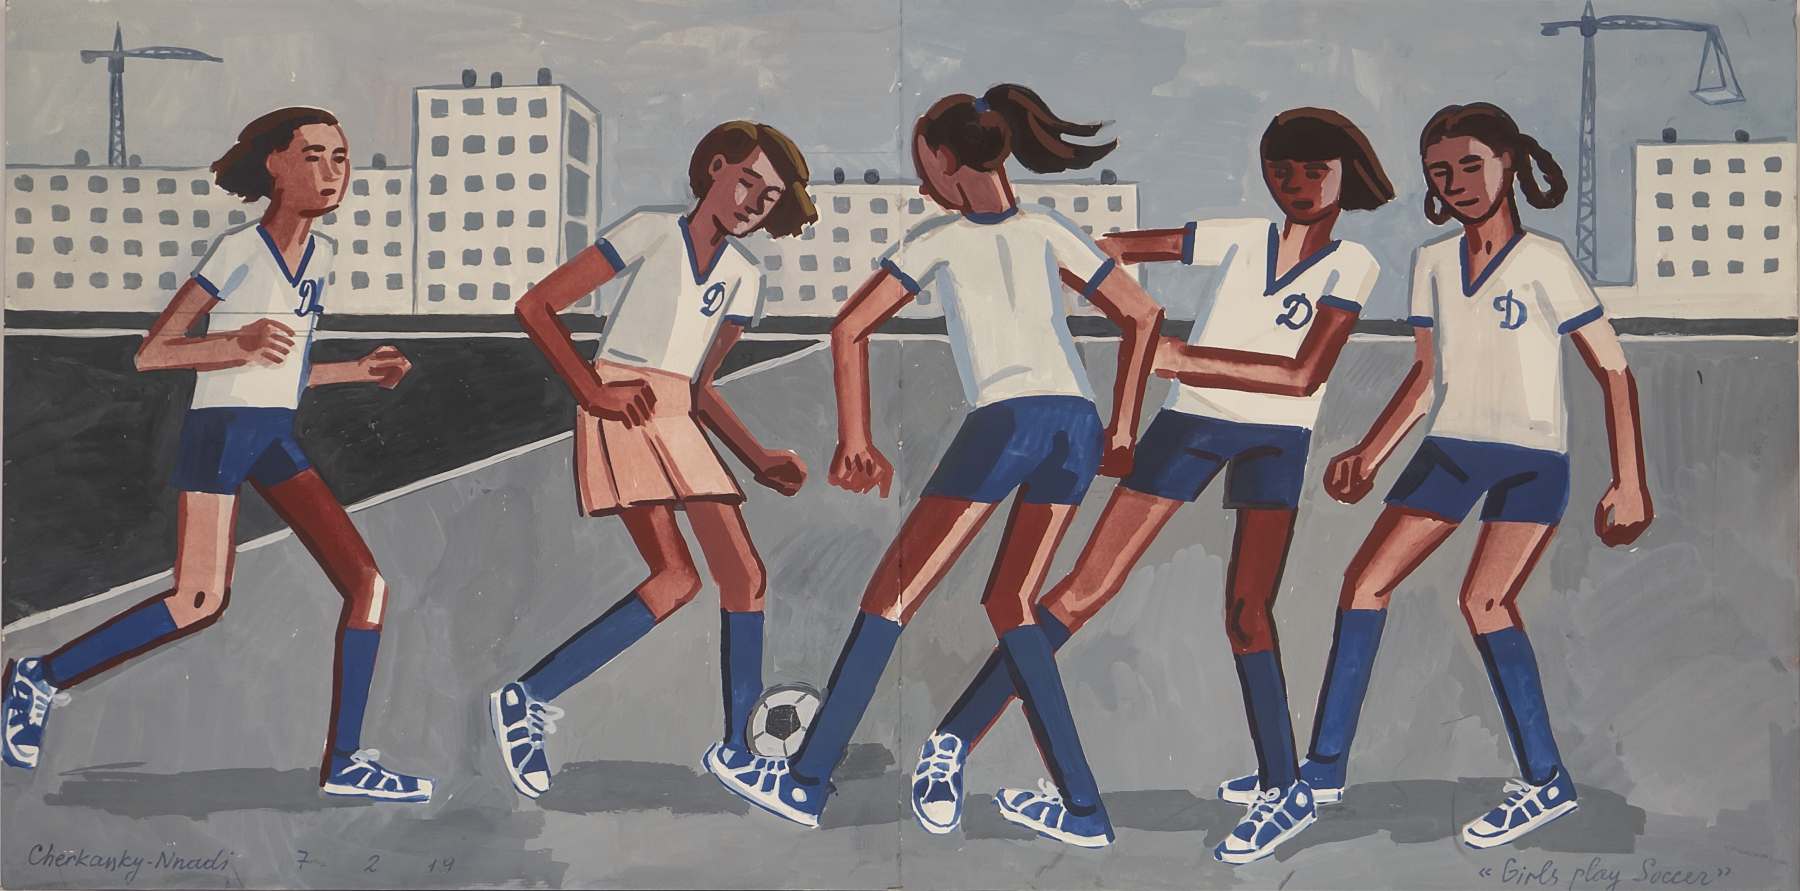 Zoya Cherkassky
Girls Play Soccer, 2019
Pencil and tempera on paper
9 x 18.5 inches